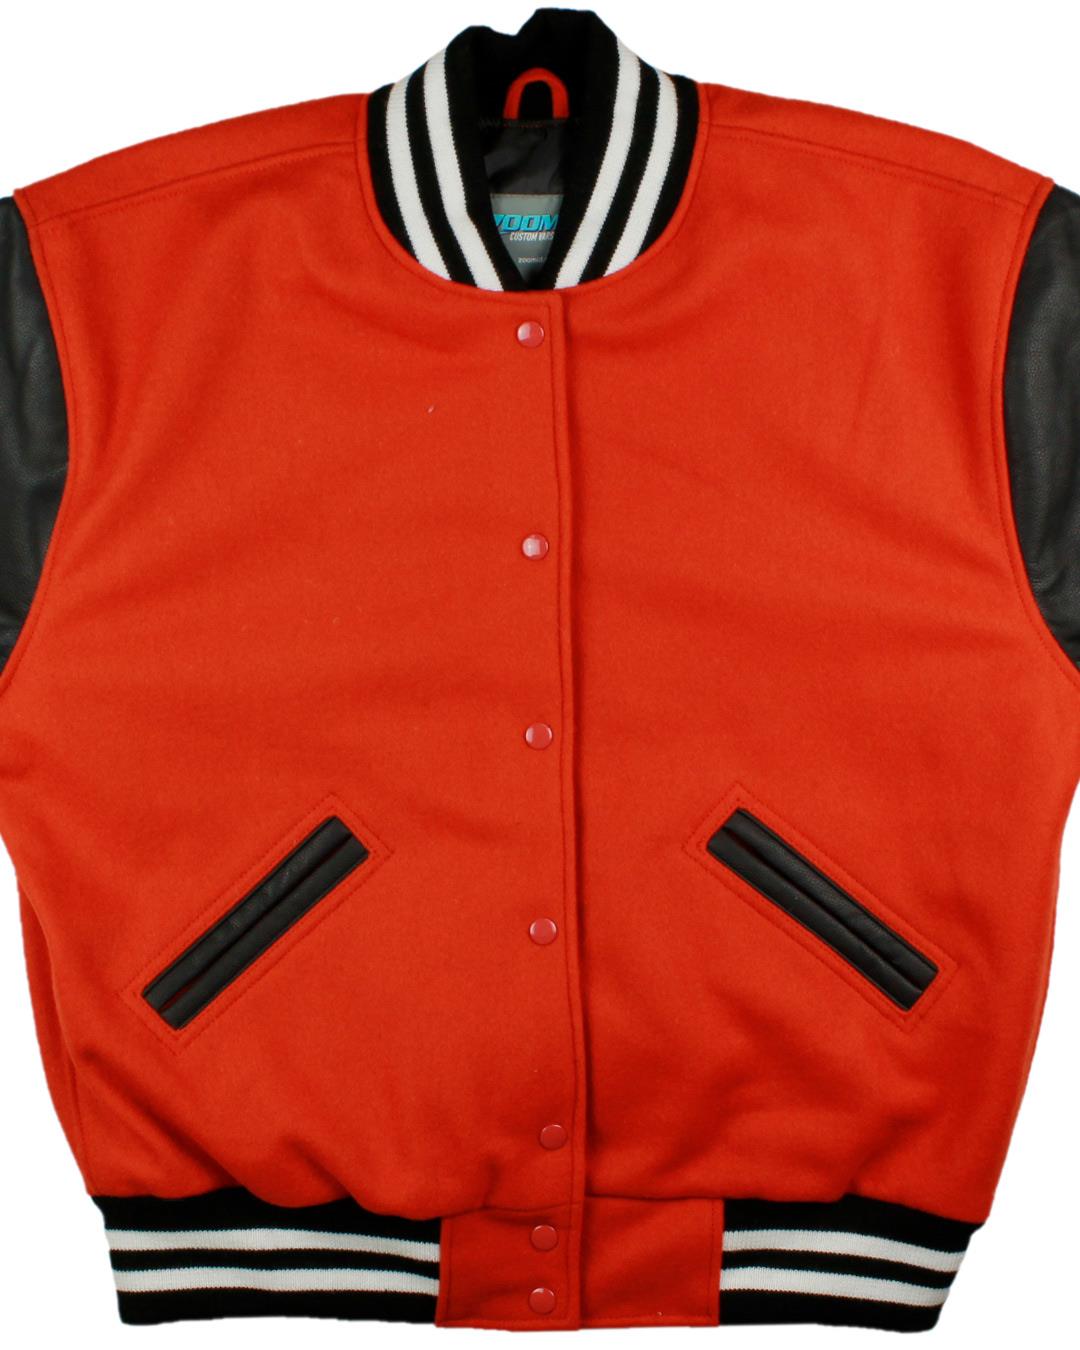 Cooperstown High School Letterman, Cooperstown, NY - Front